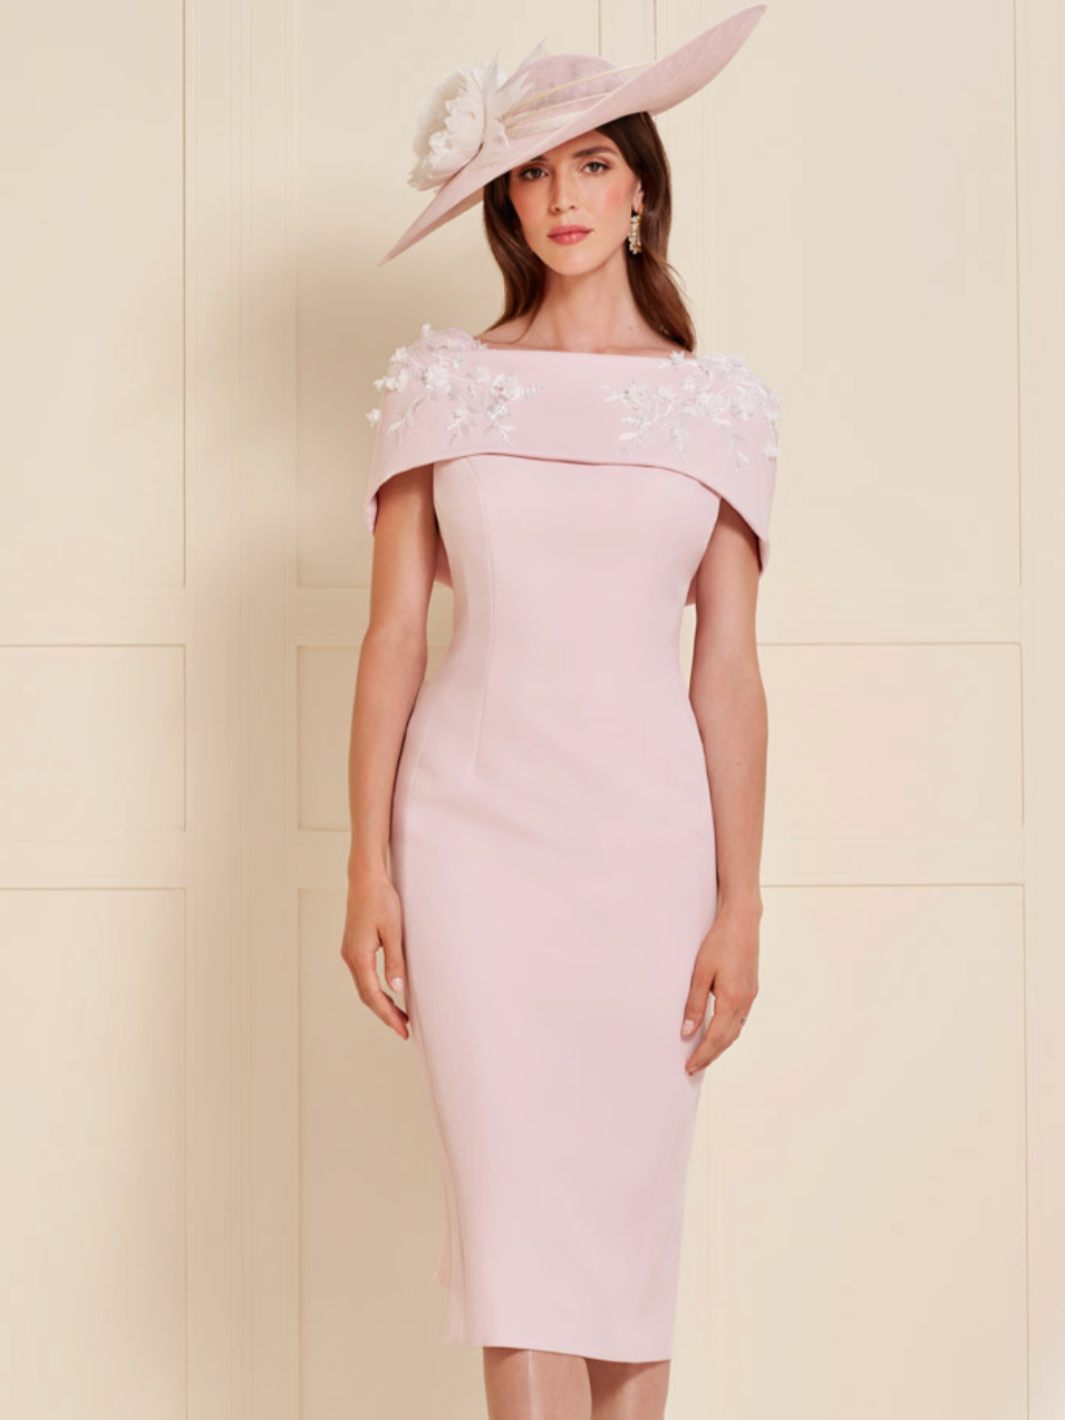 John Charles Dress In Petal / Ivory 66503-Mother of the bride- mother of the groom -Nicola Ross